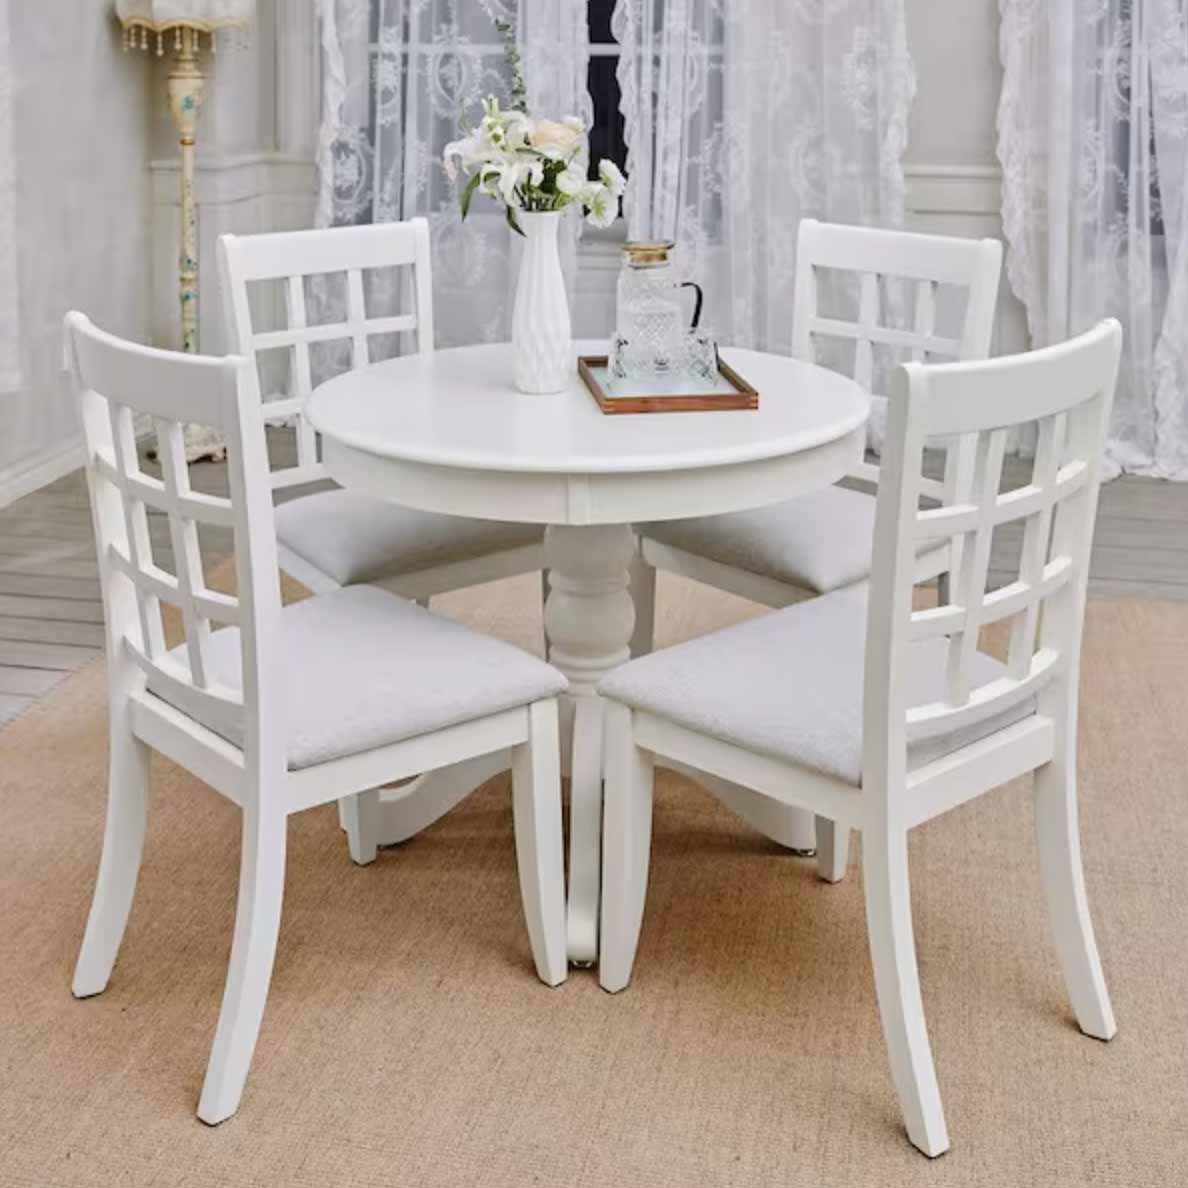 White, round dining table setting with 4 chairs